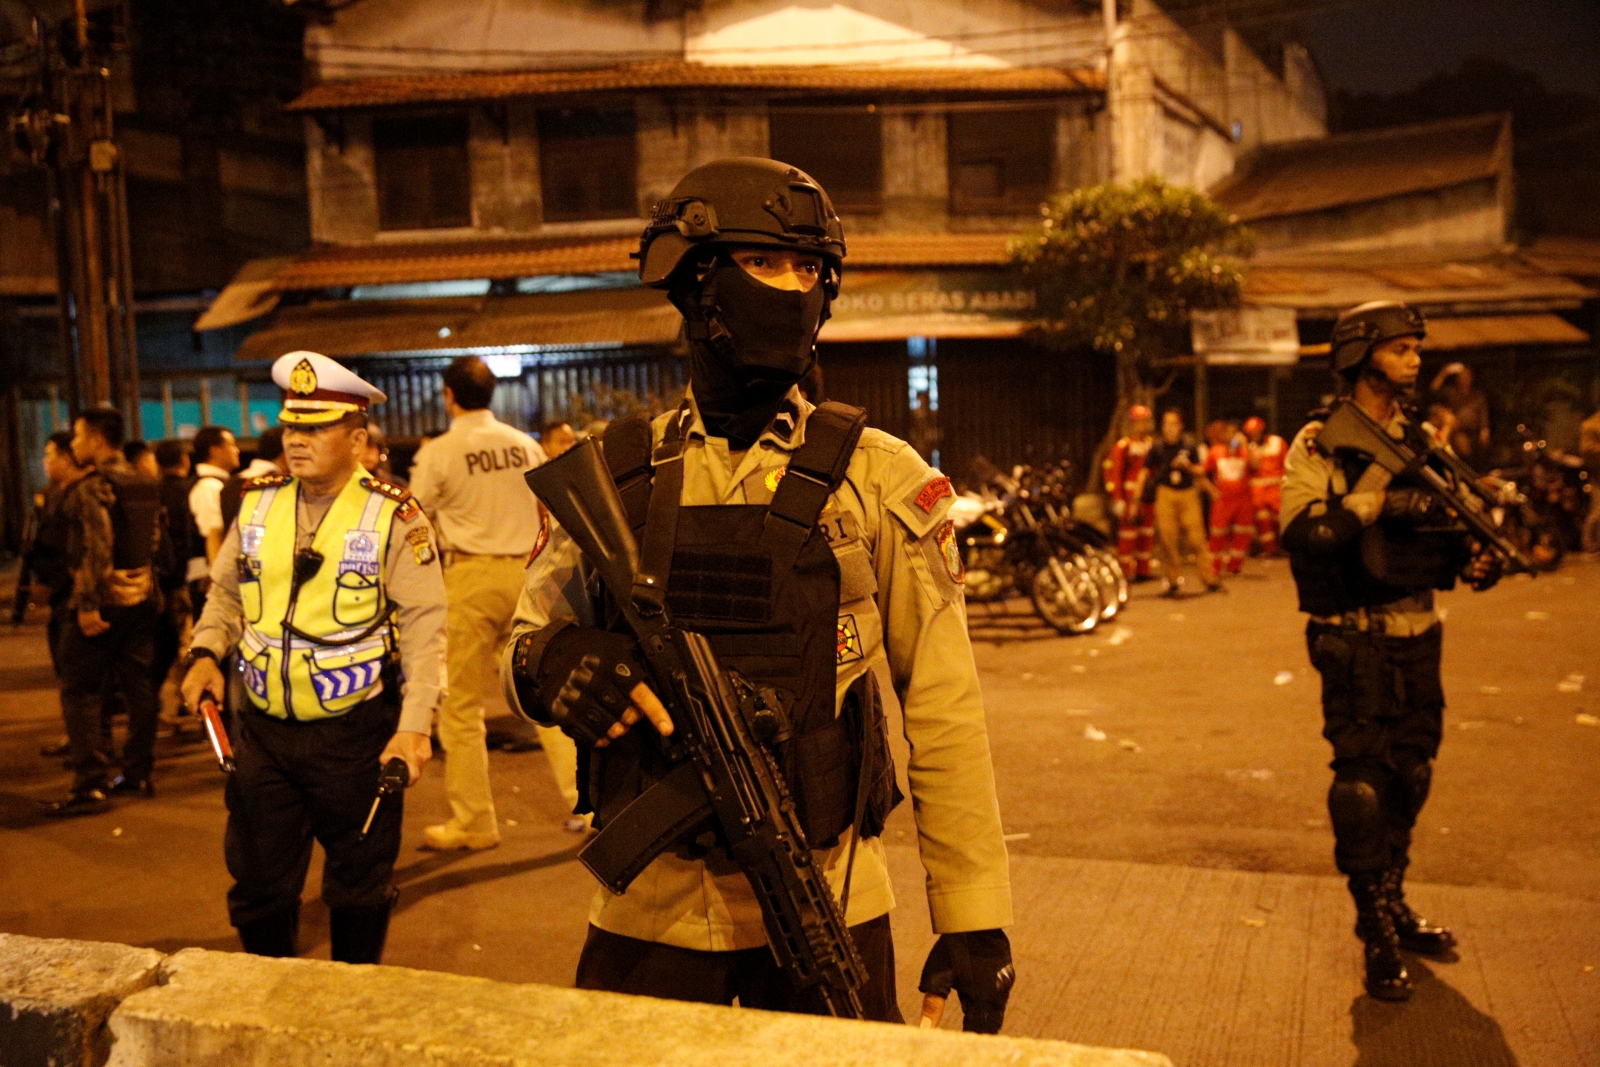 Jakarta bombings: Police officer among two killed in suspected suicide